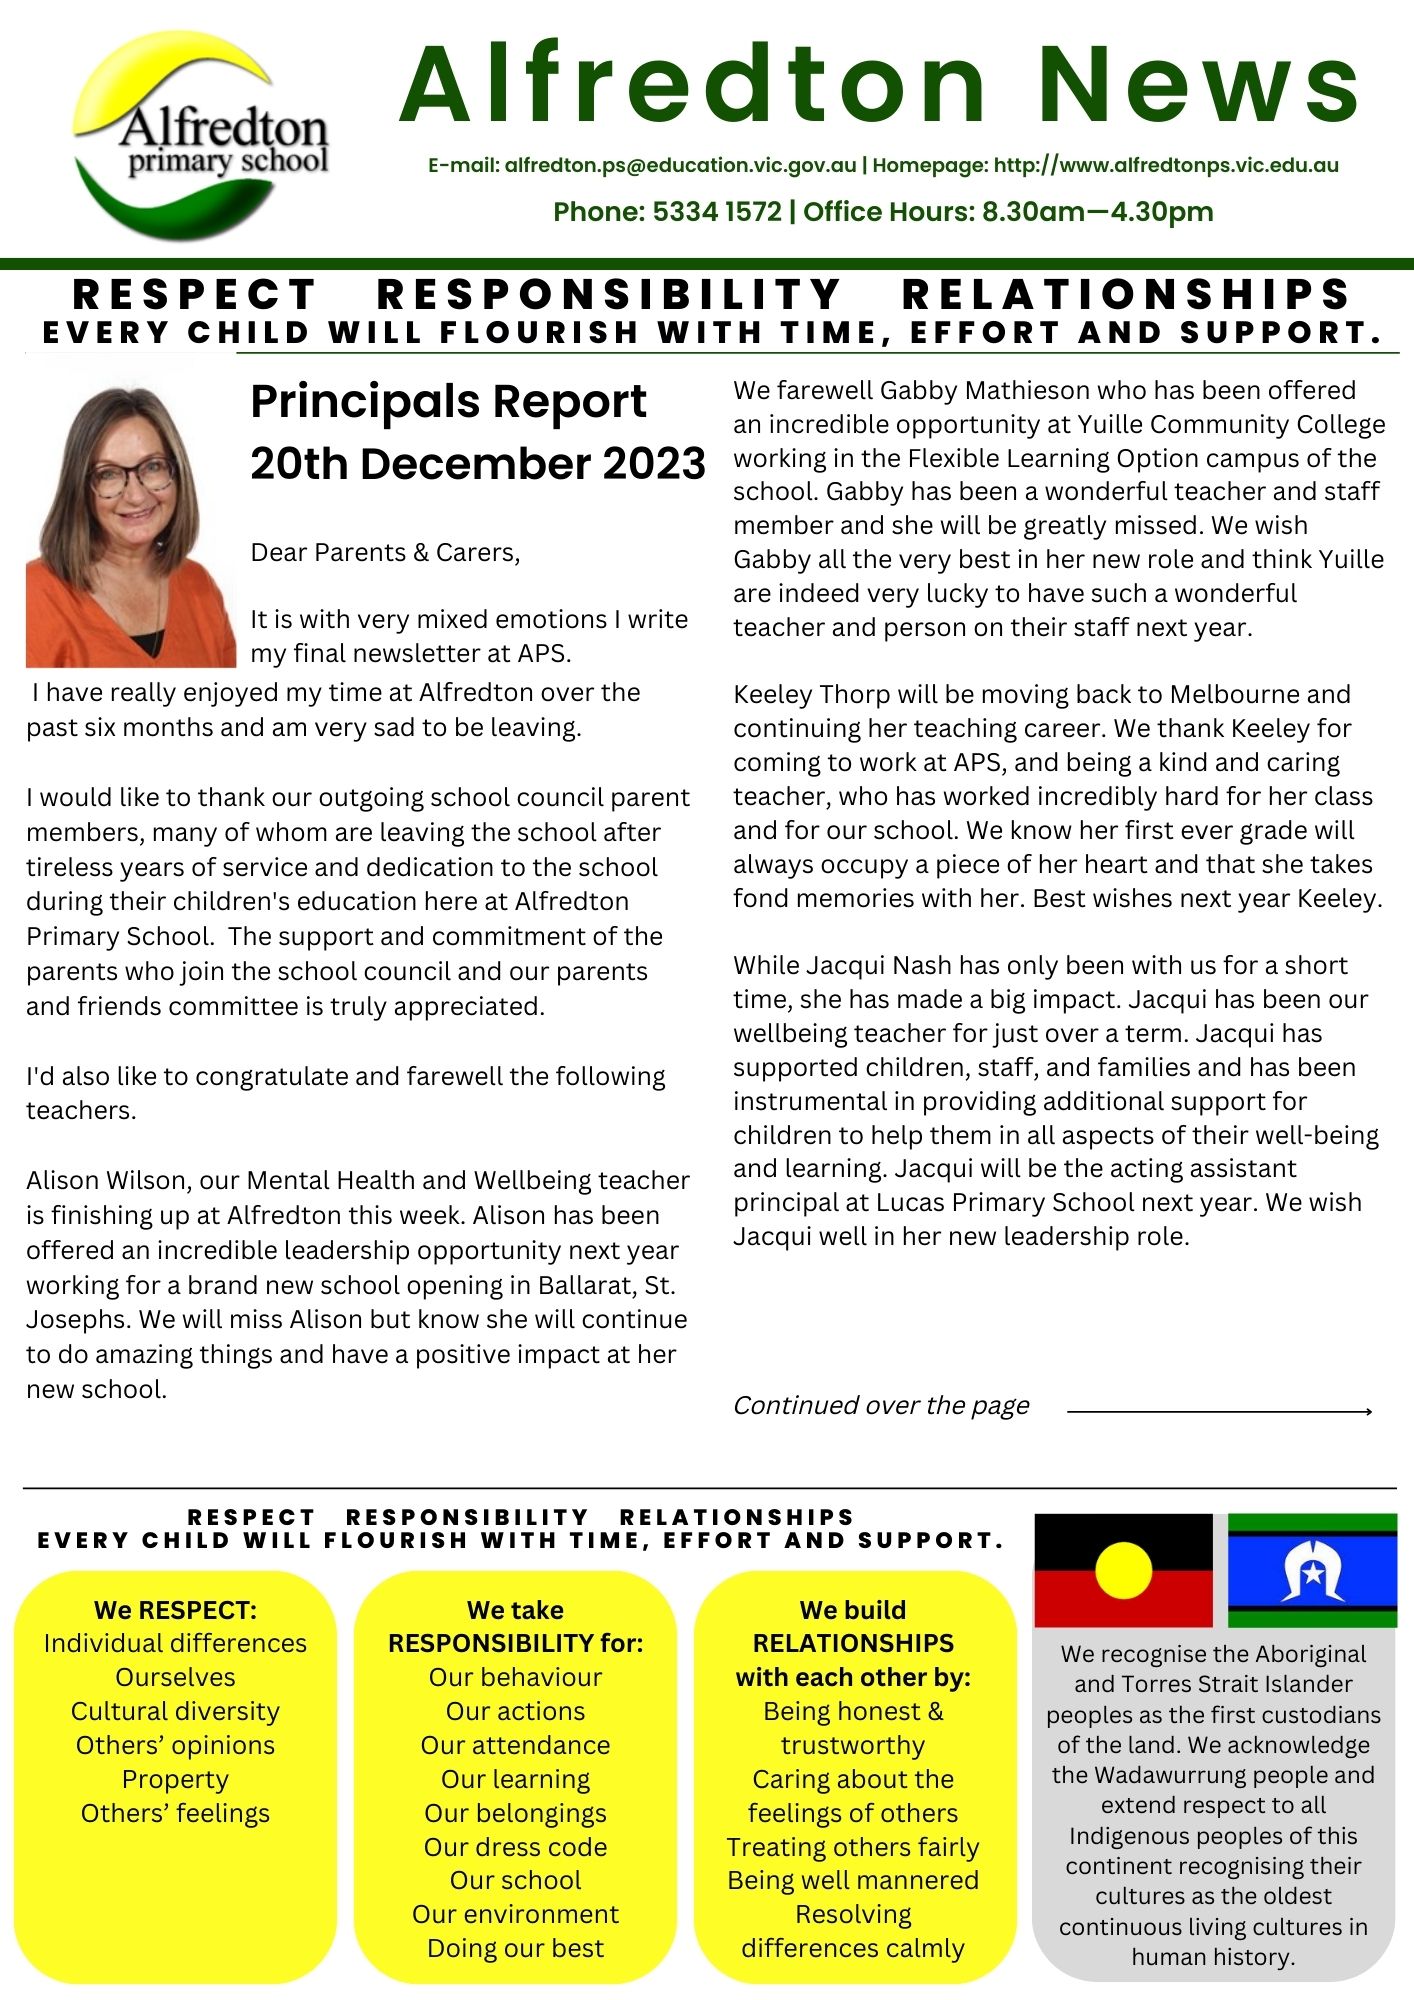 1st page of the 20th December Newsletter